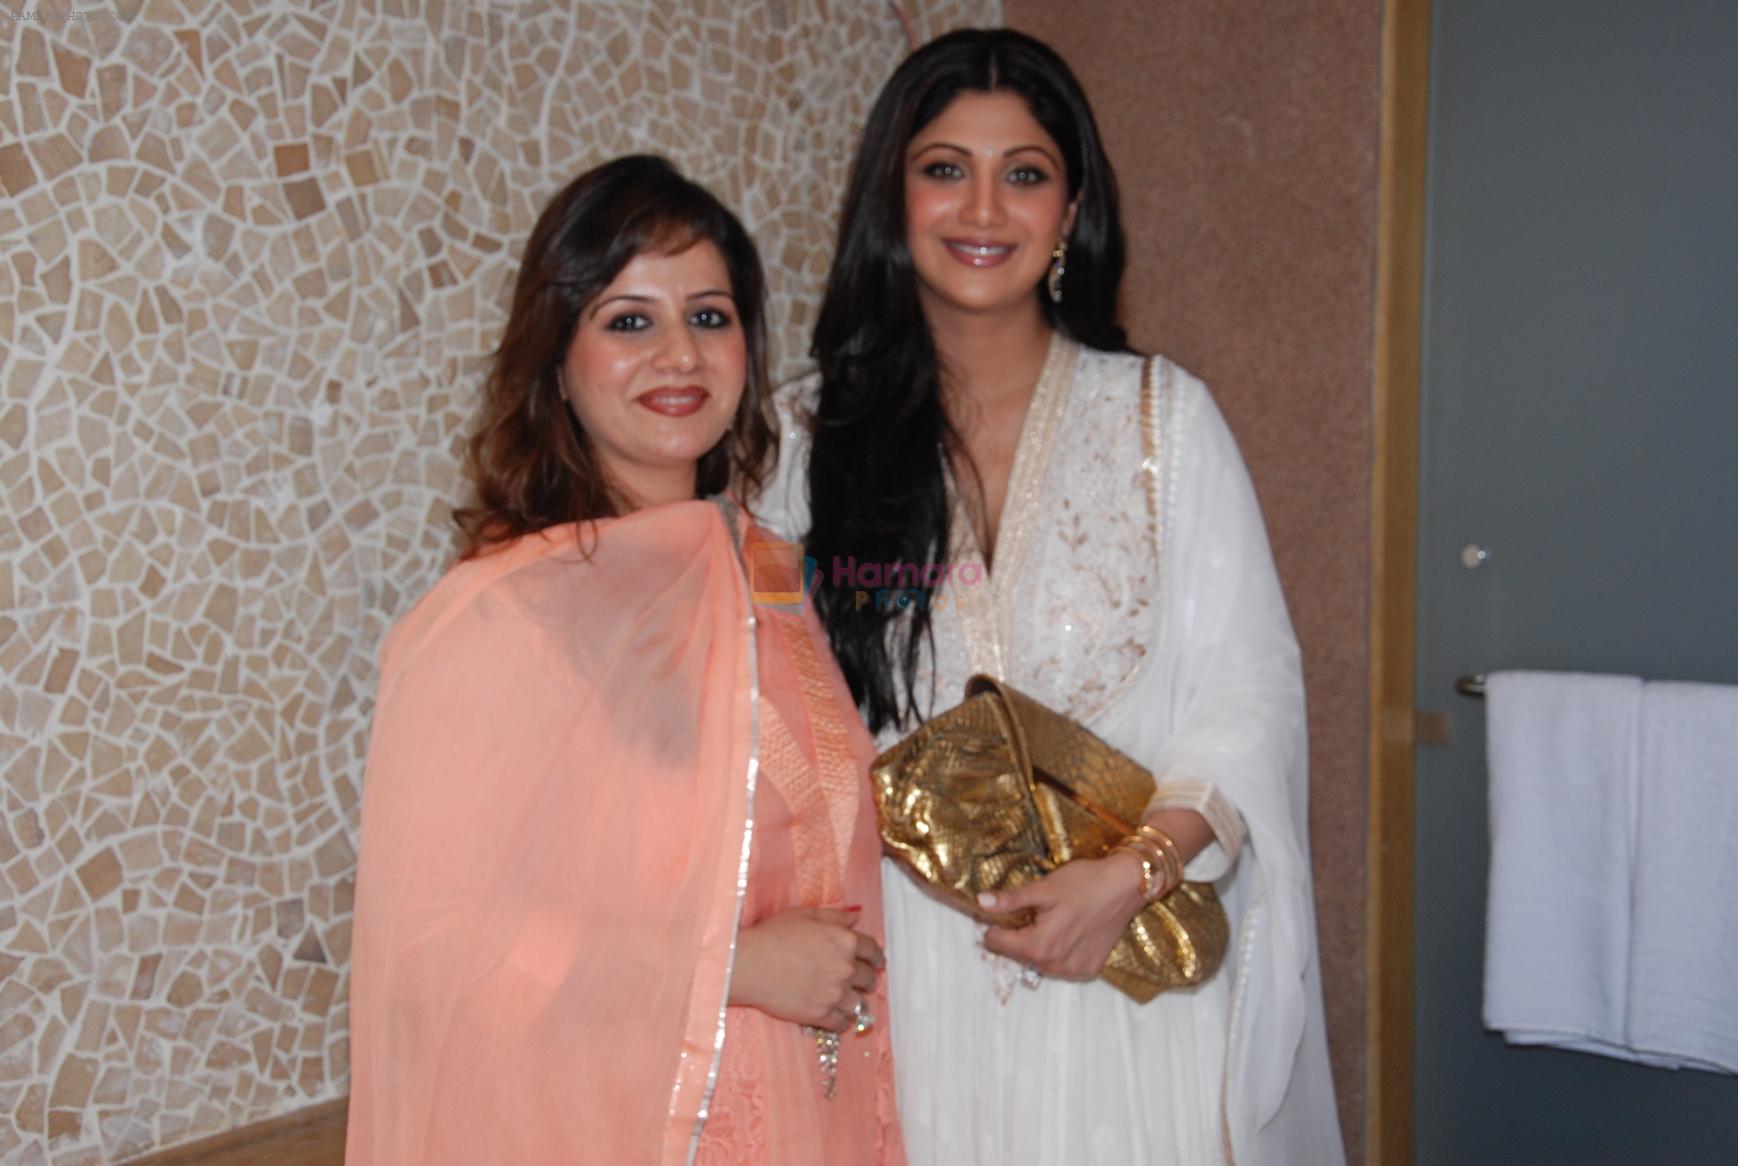 Shilpa Shetty and Kiran Bawa at the launch of Lucknow branch of IOSIS spa in Gomti Nagar on 14th Sept 2012